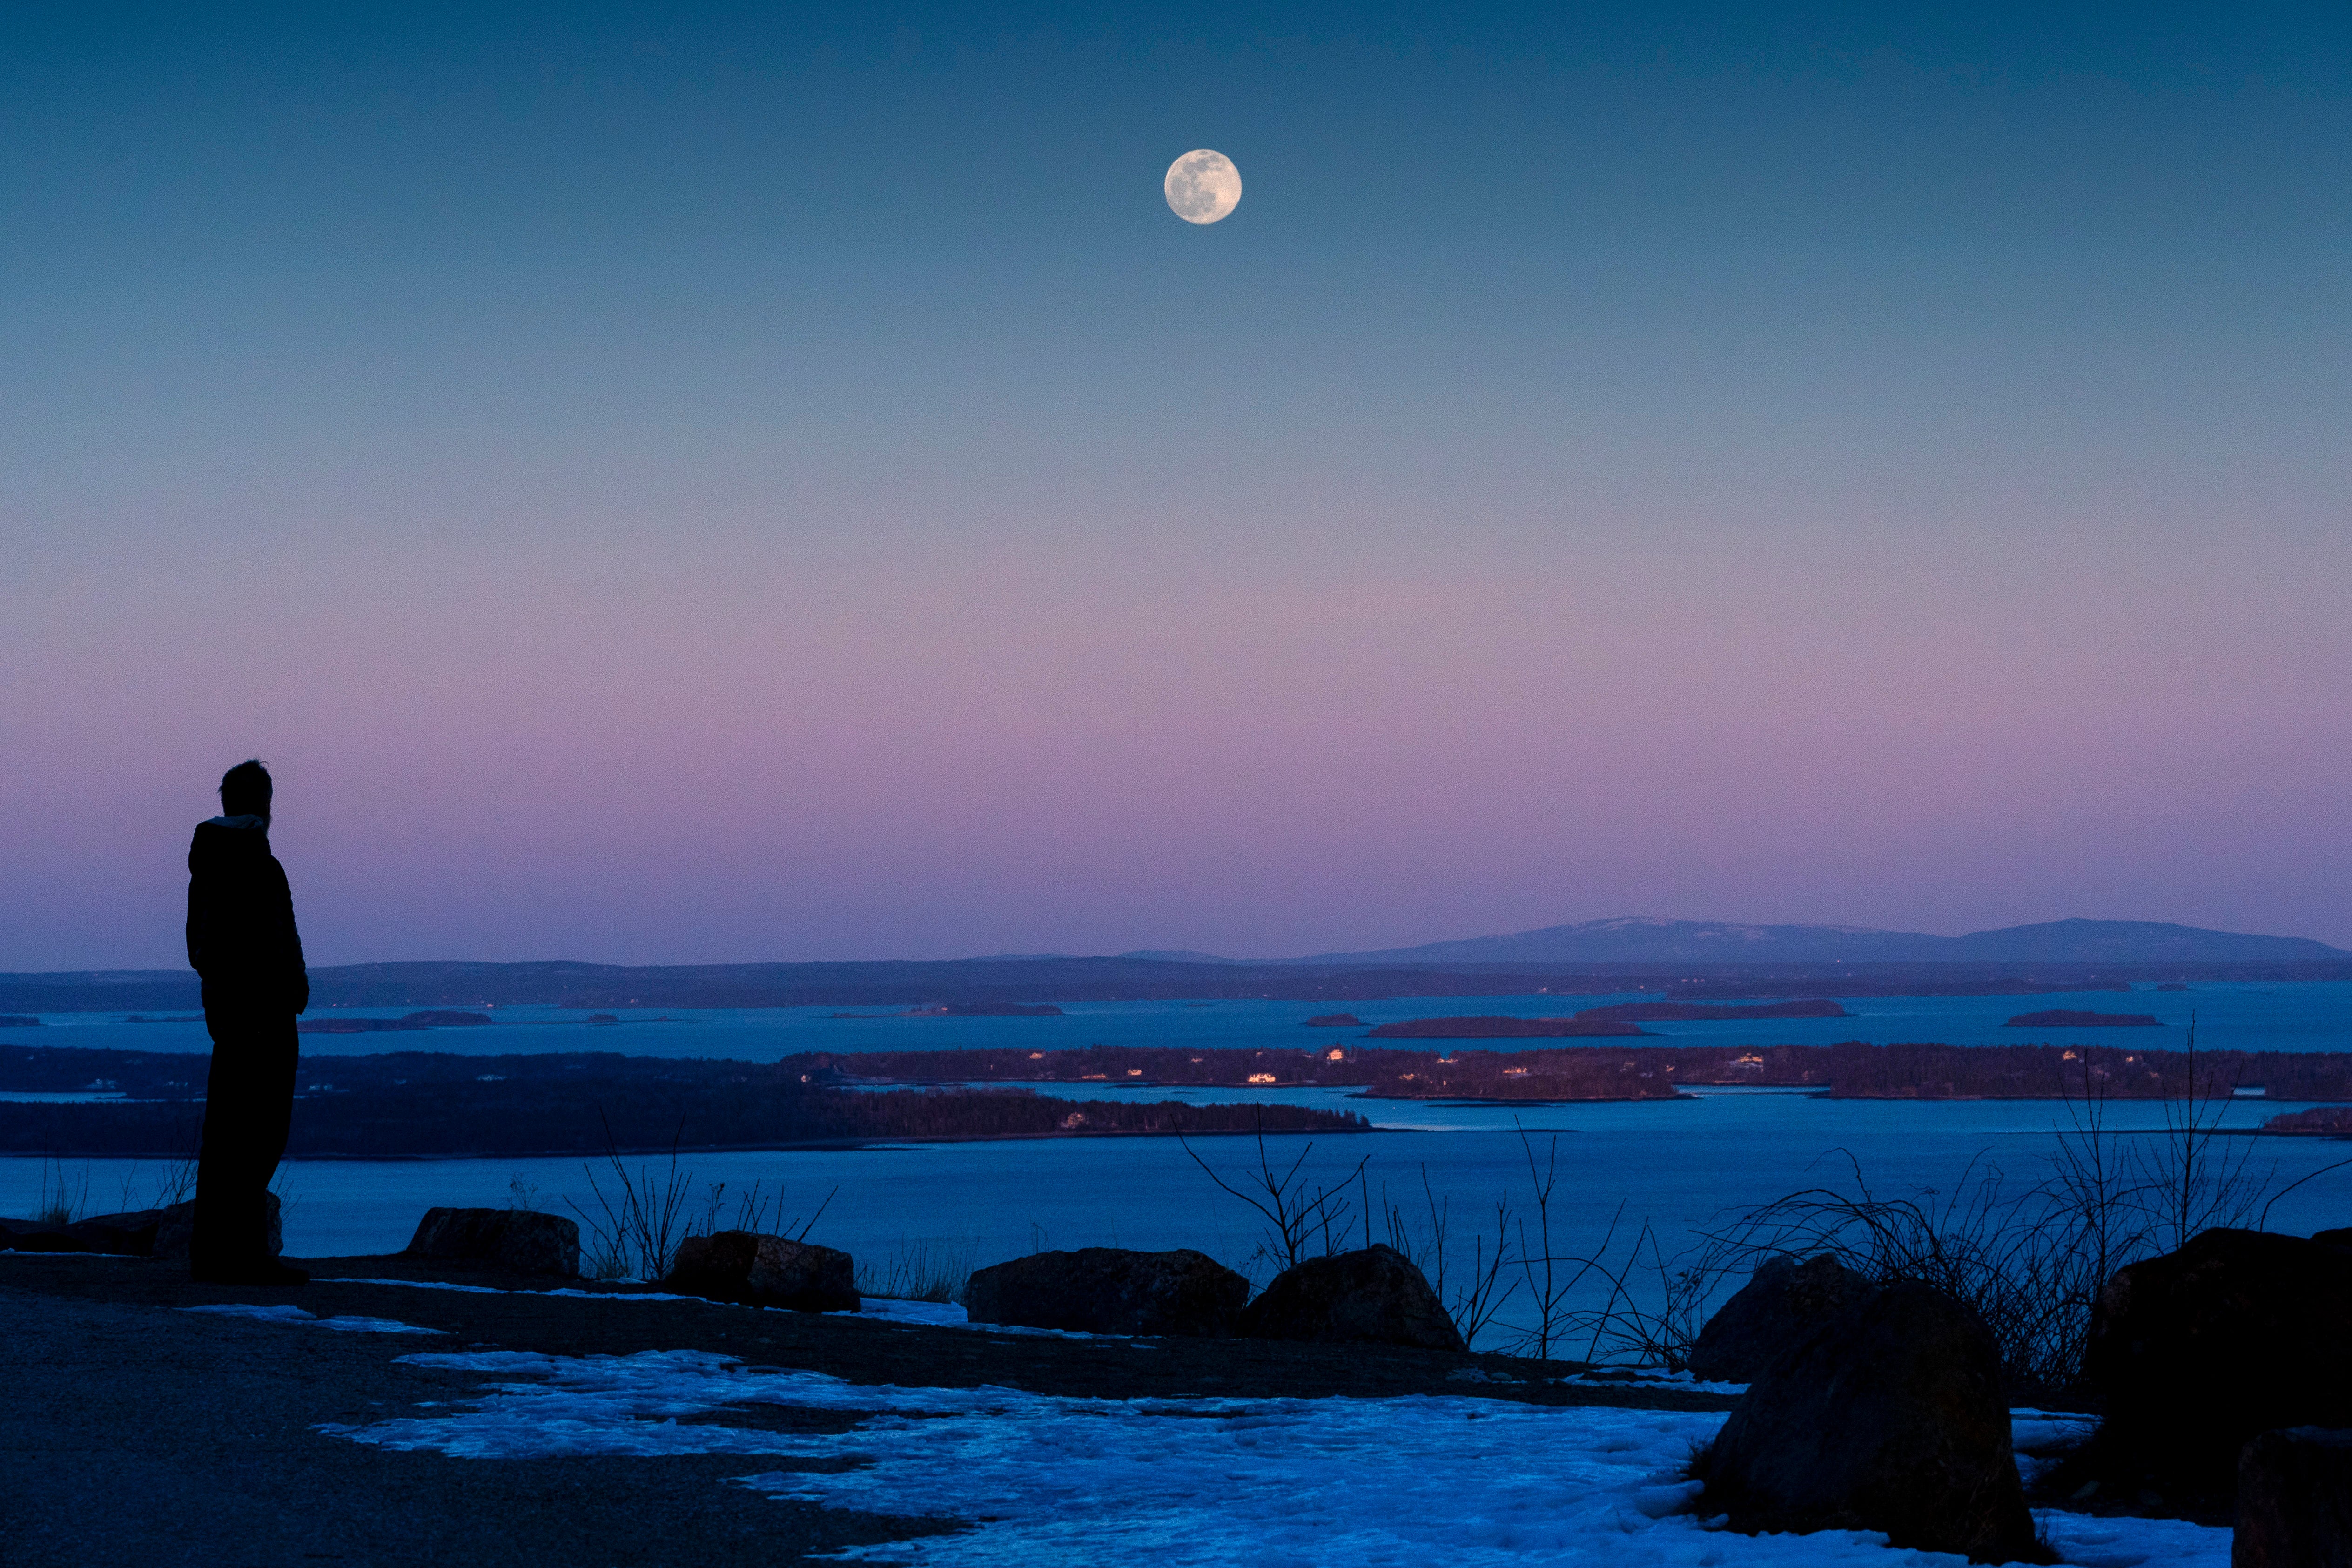 Shawn Griffith, of South Port, Maine, watches the “snow moon” rise in clear skies over Penobscot Bay